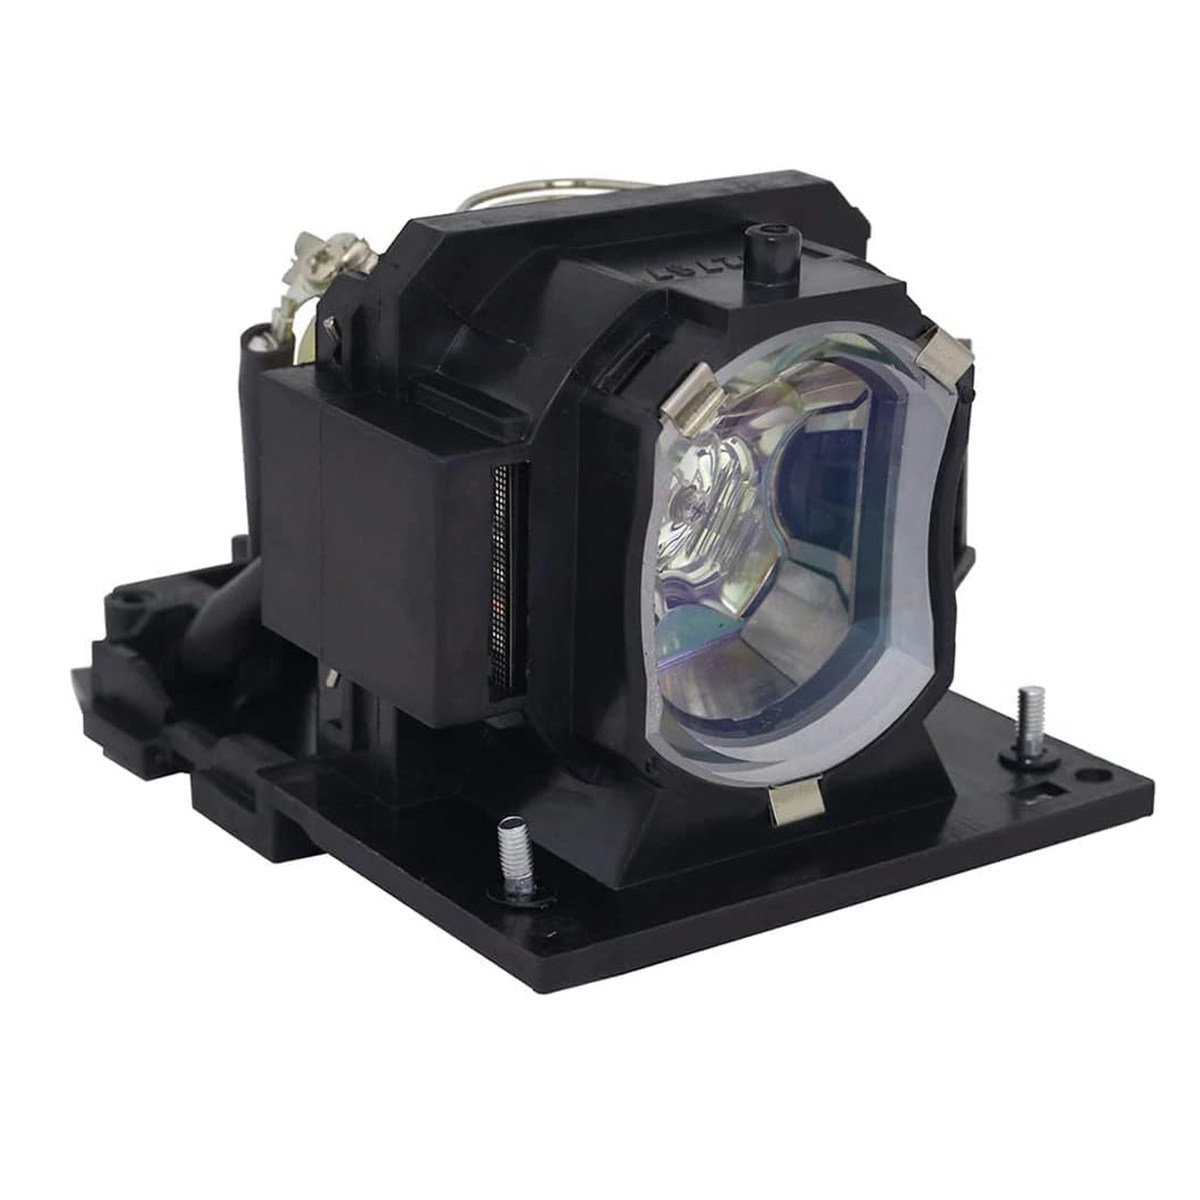 Replacement Projector lamp DT01411 For Hitachi CP-A352WNM CP-AW2503 CP-AW3003